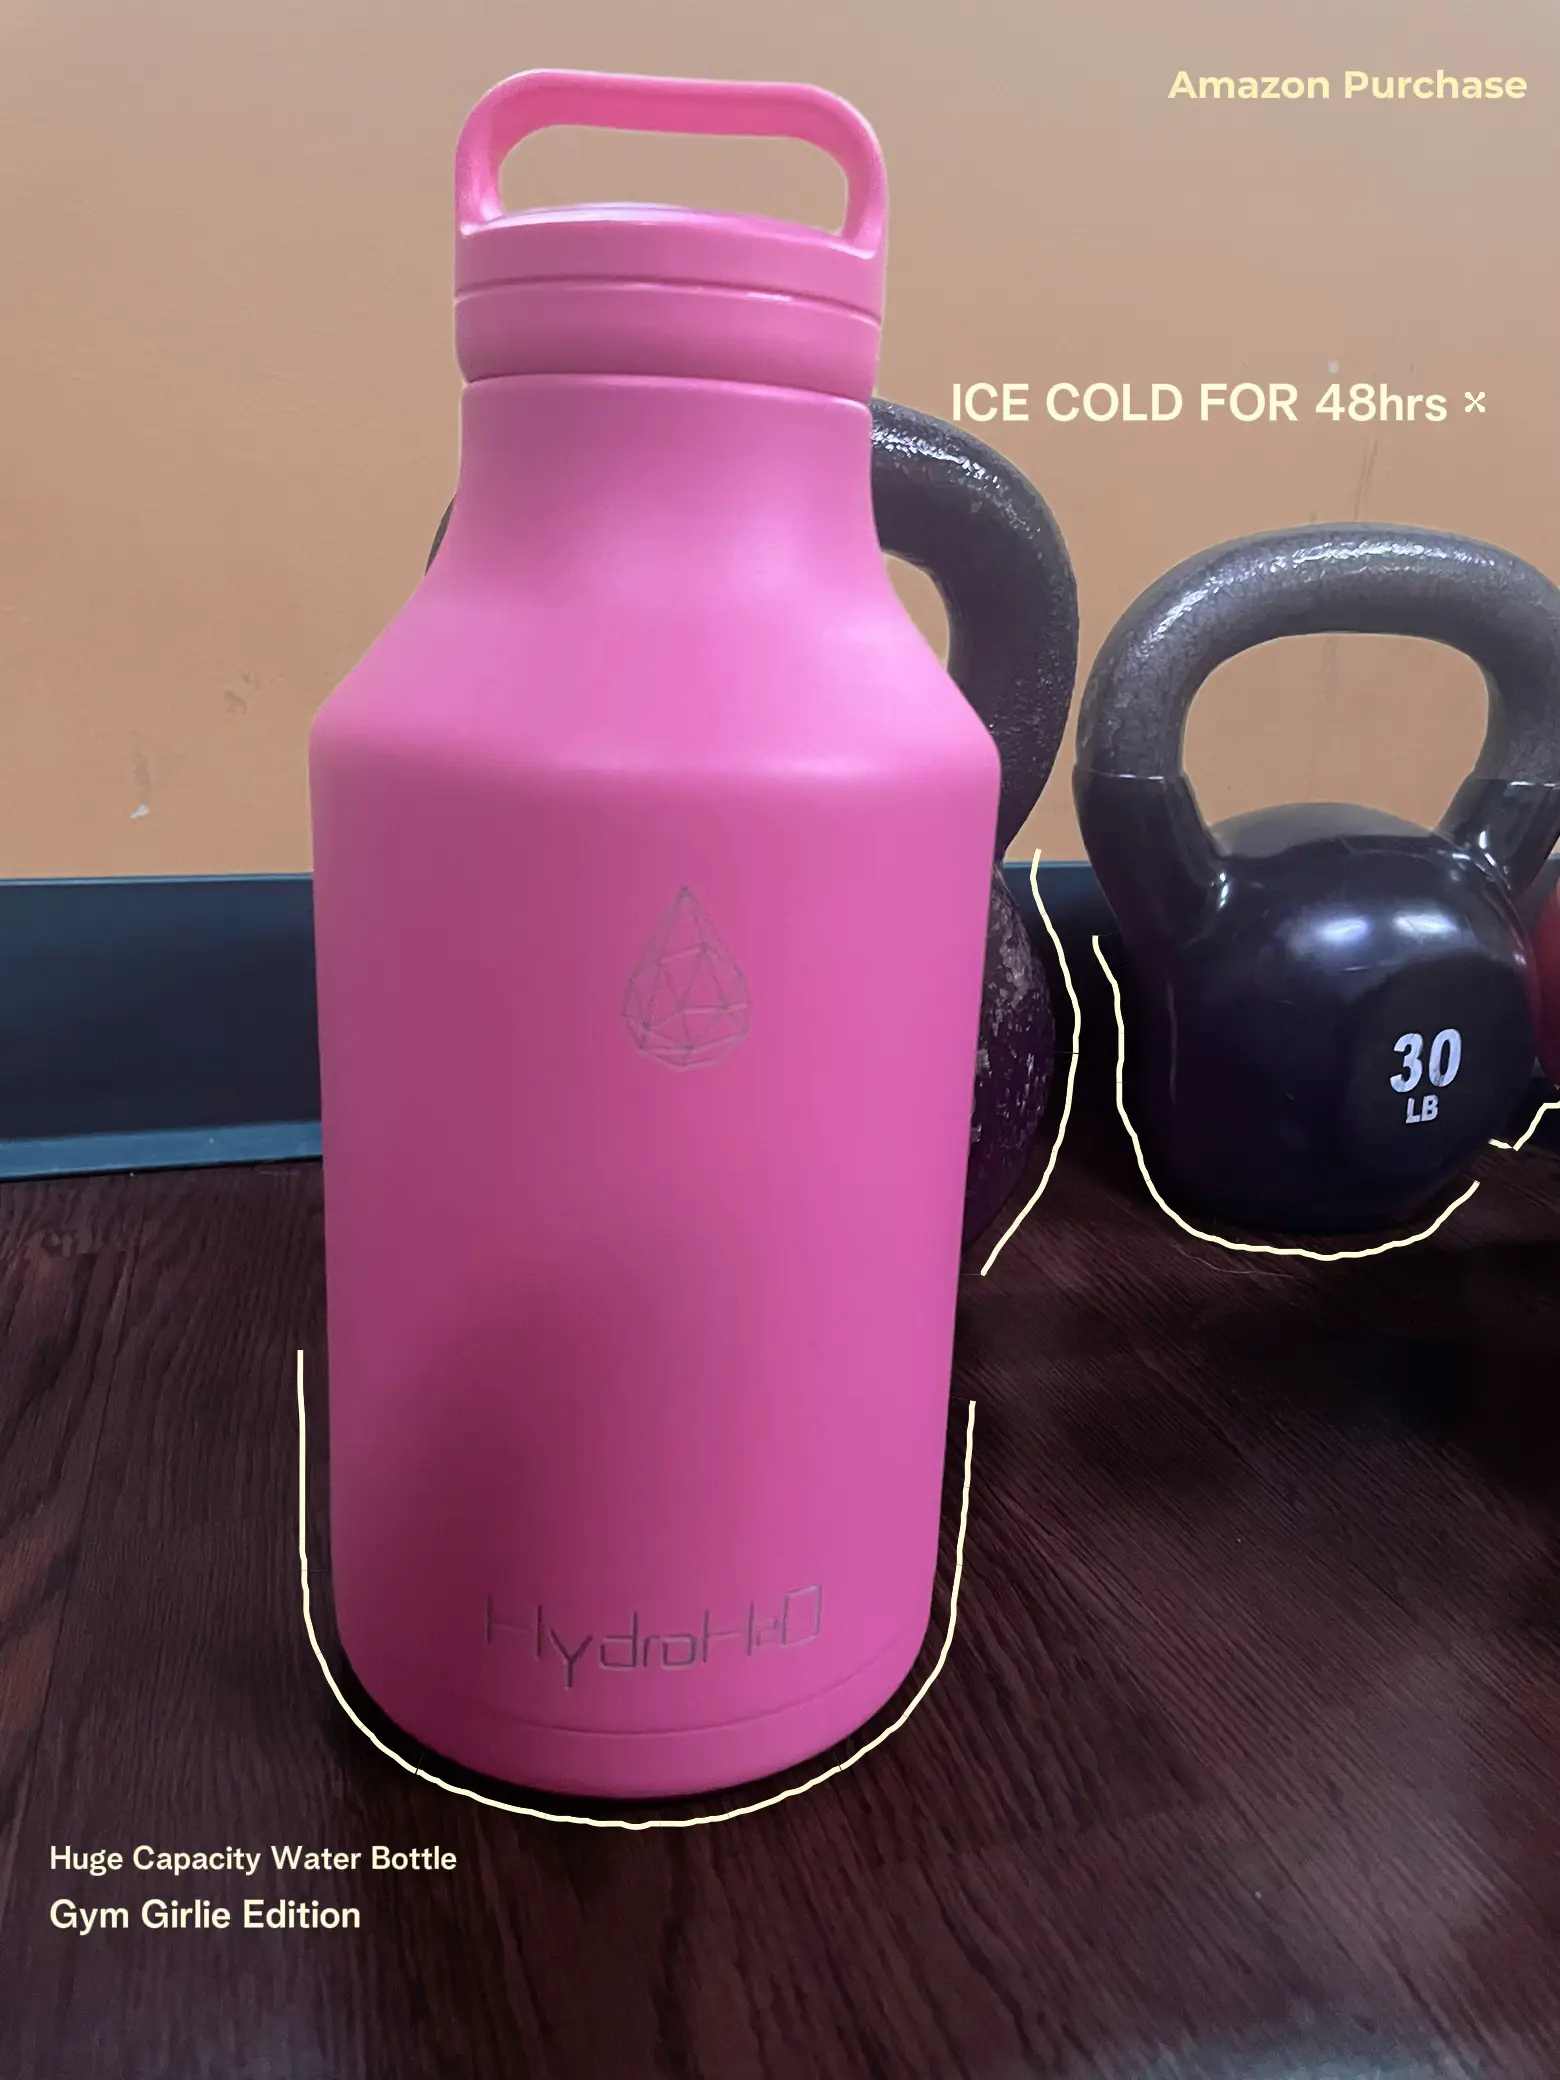 Here's why The HydroJug Traveler is going viral on social media